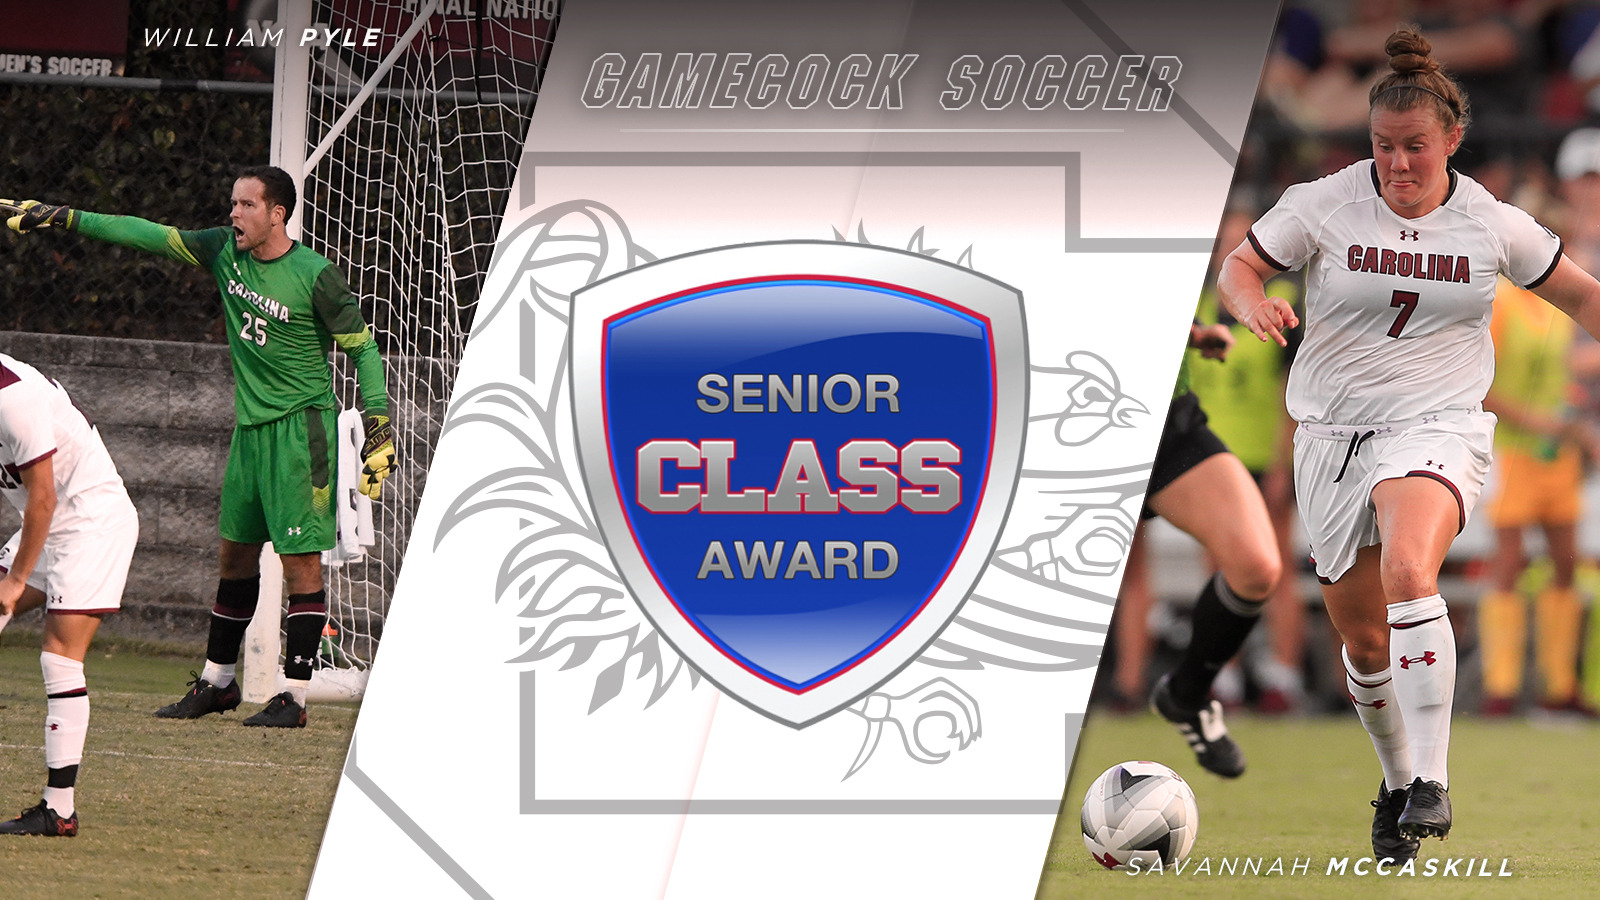 McCaskill and Pyle Named Candidates For Senior Class Award